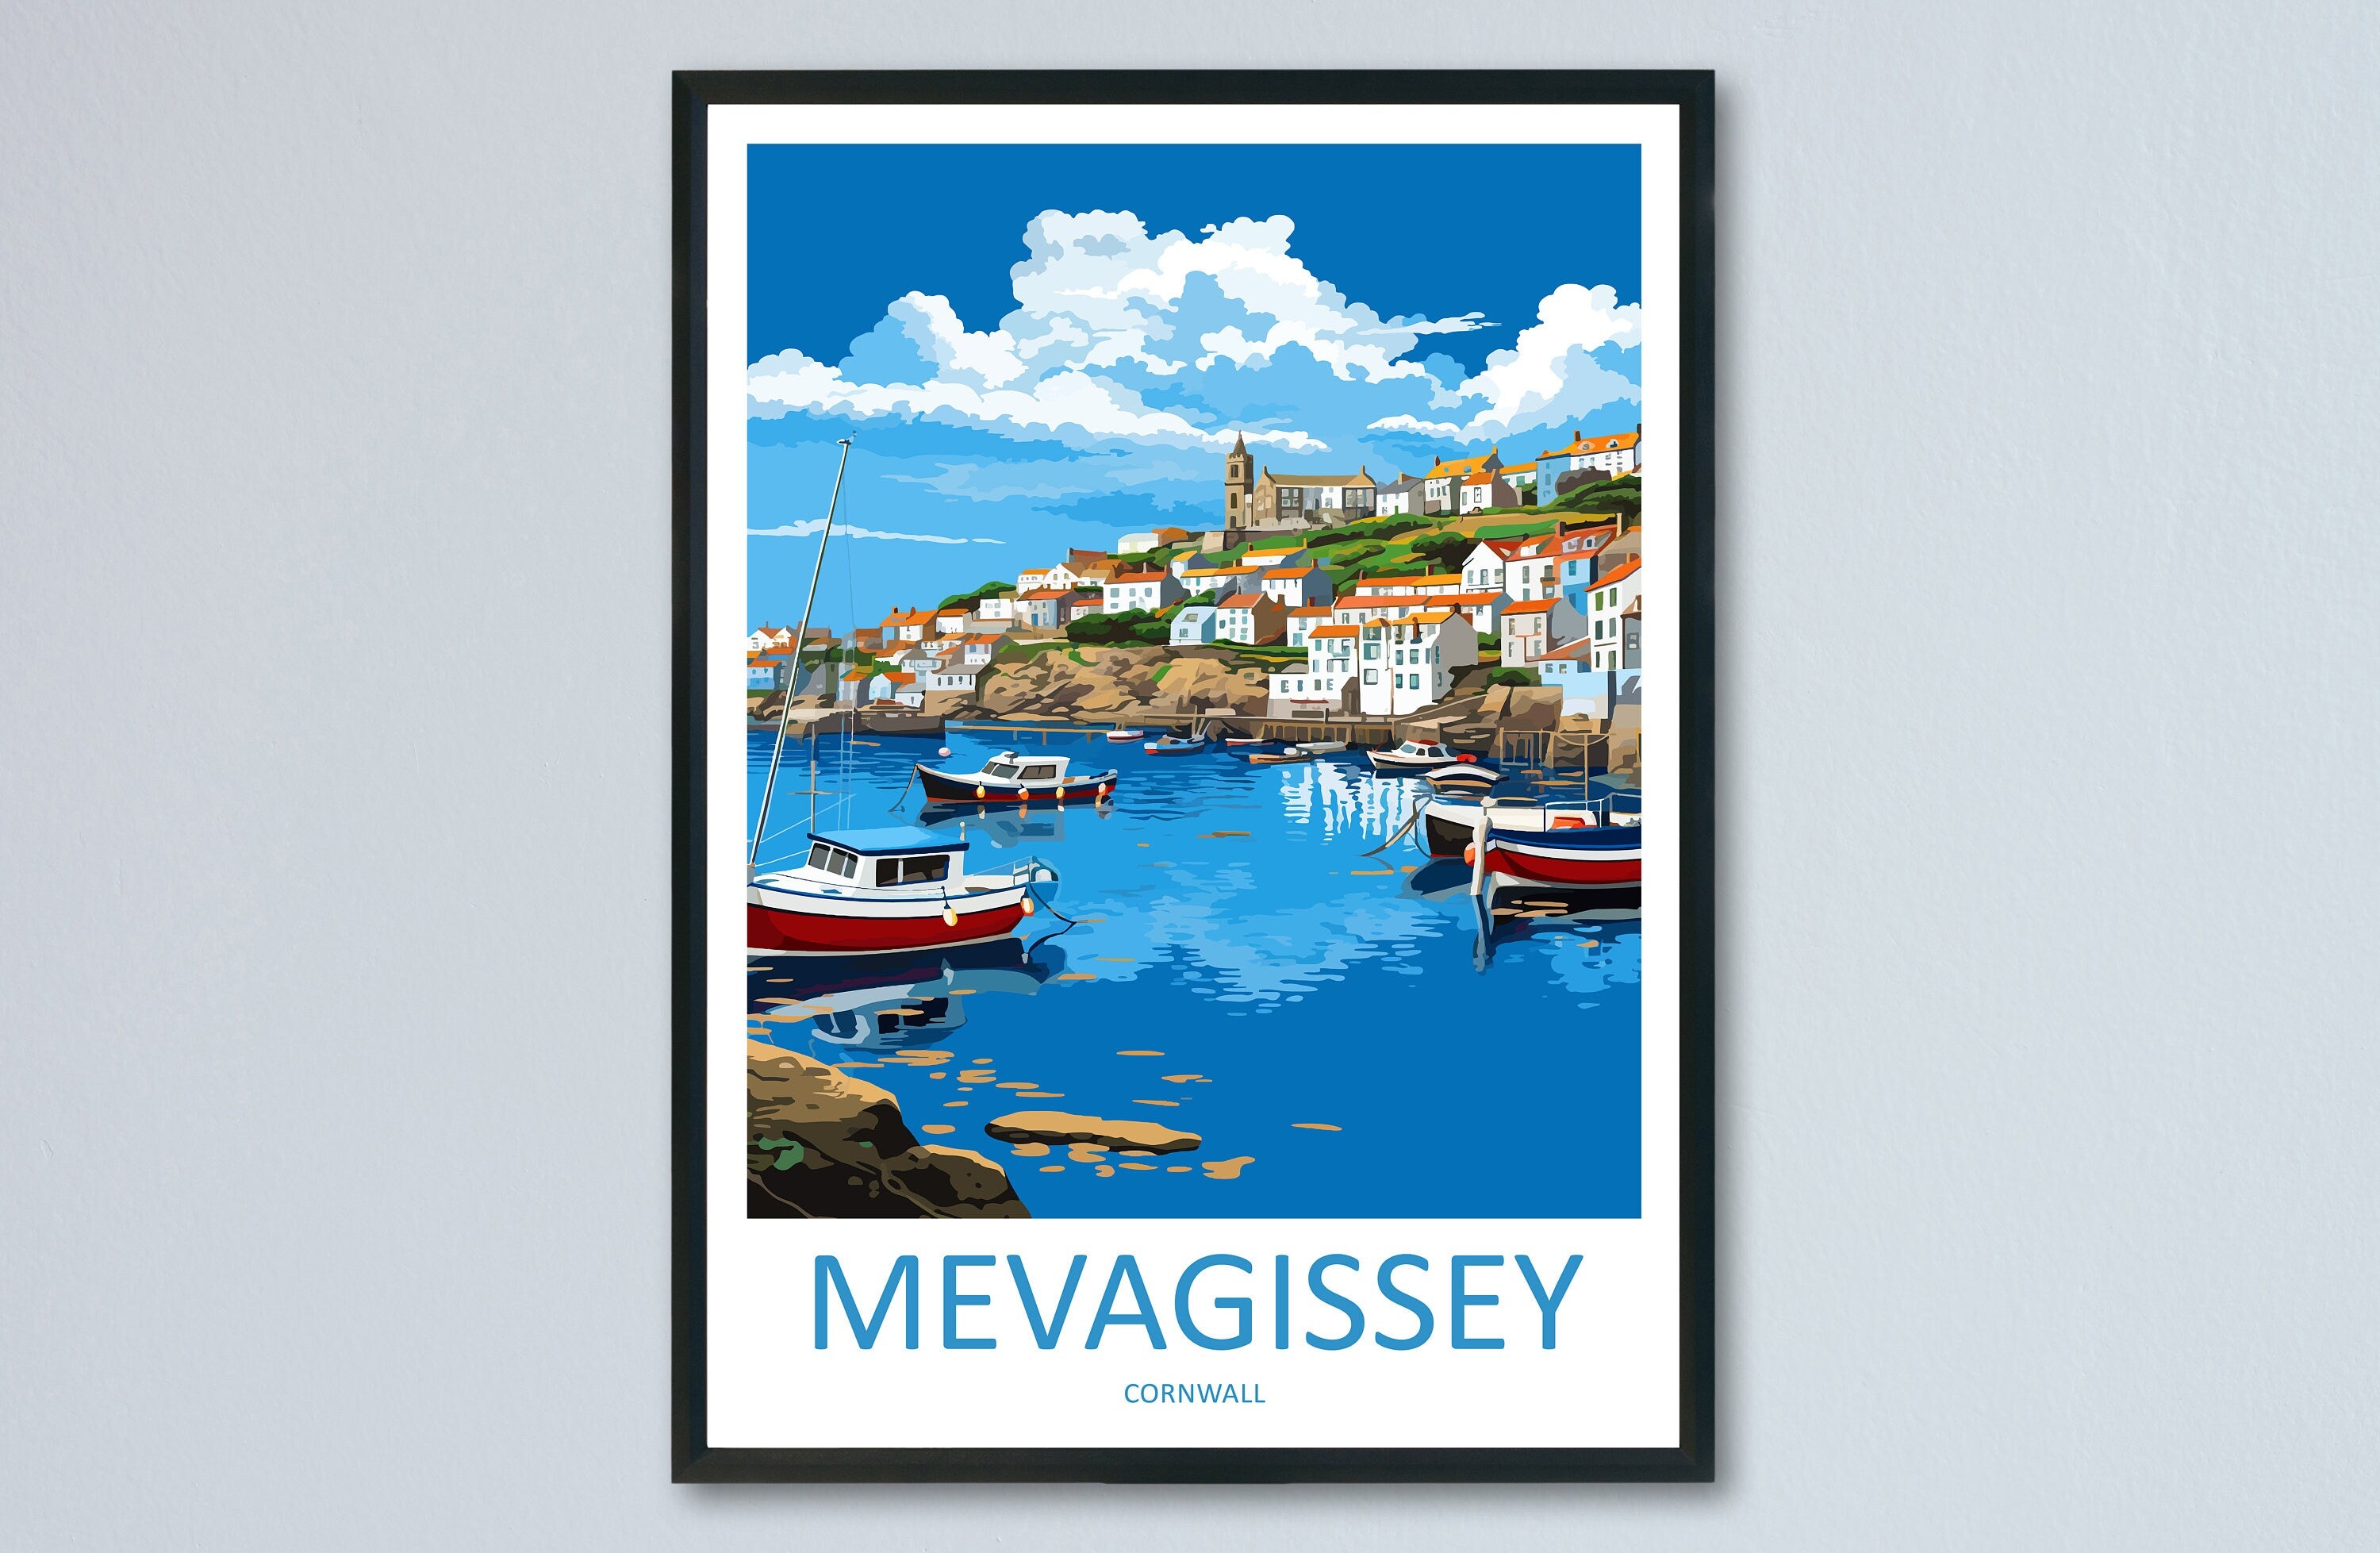 Mevagissey Travel Print Wall Art Mevagissey Wall Hanging Home Décor Mevagissey Gift Art Lovers England Art Lover Gift Mevagissey Poster